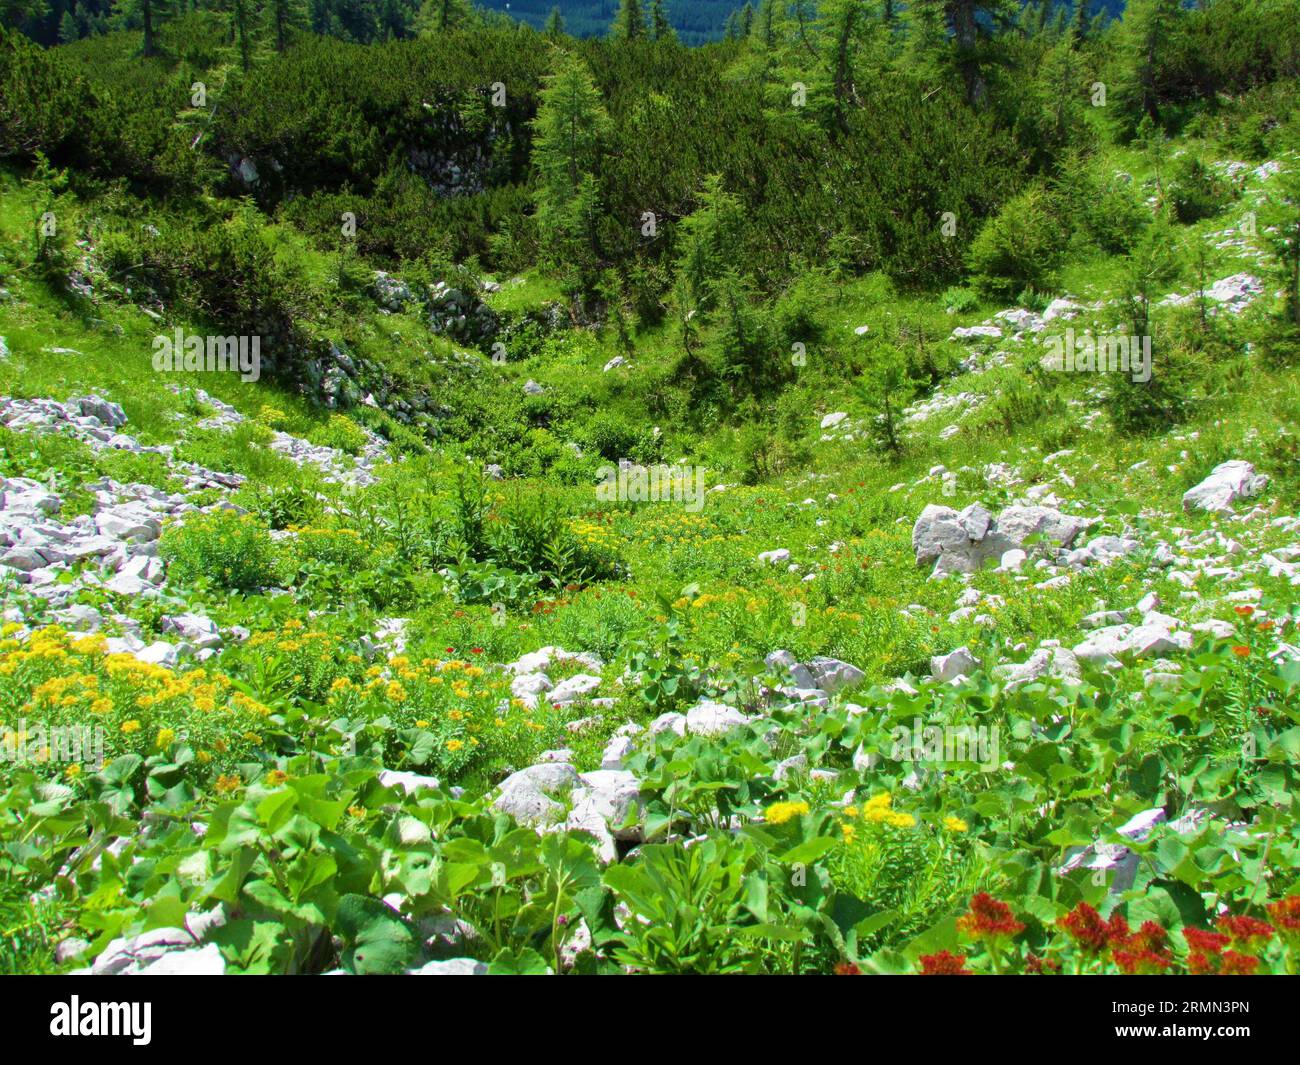 Alpine meadow full of blooming golden root, rose root (Rhodiola rosea) flowers and creeping pine (Pinus mugo) and small larch trees in the backround i Stock Photo